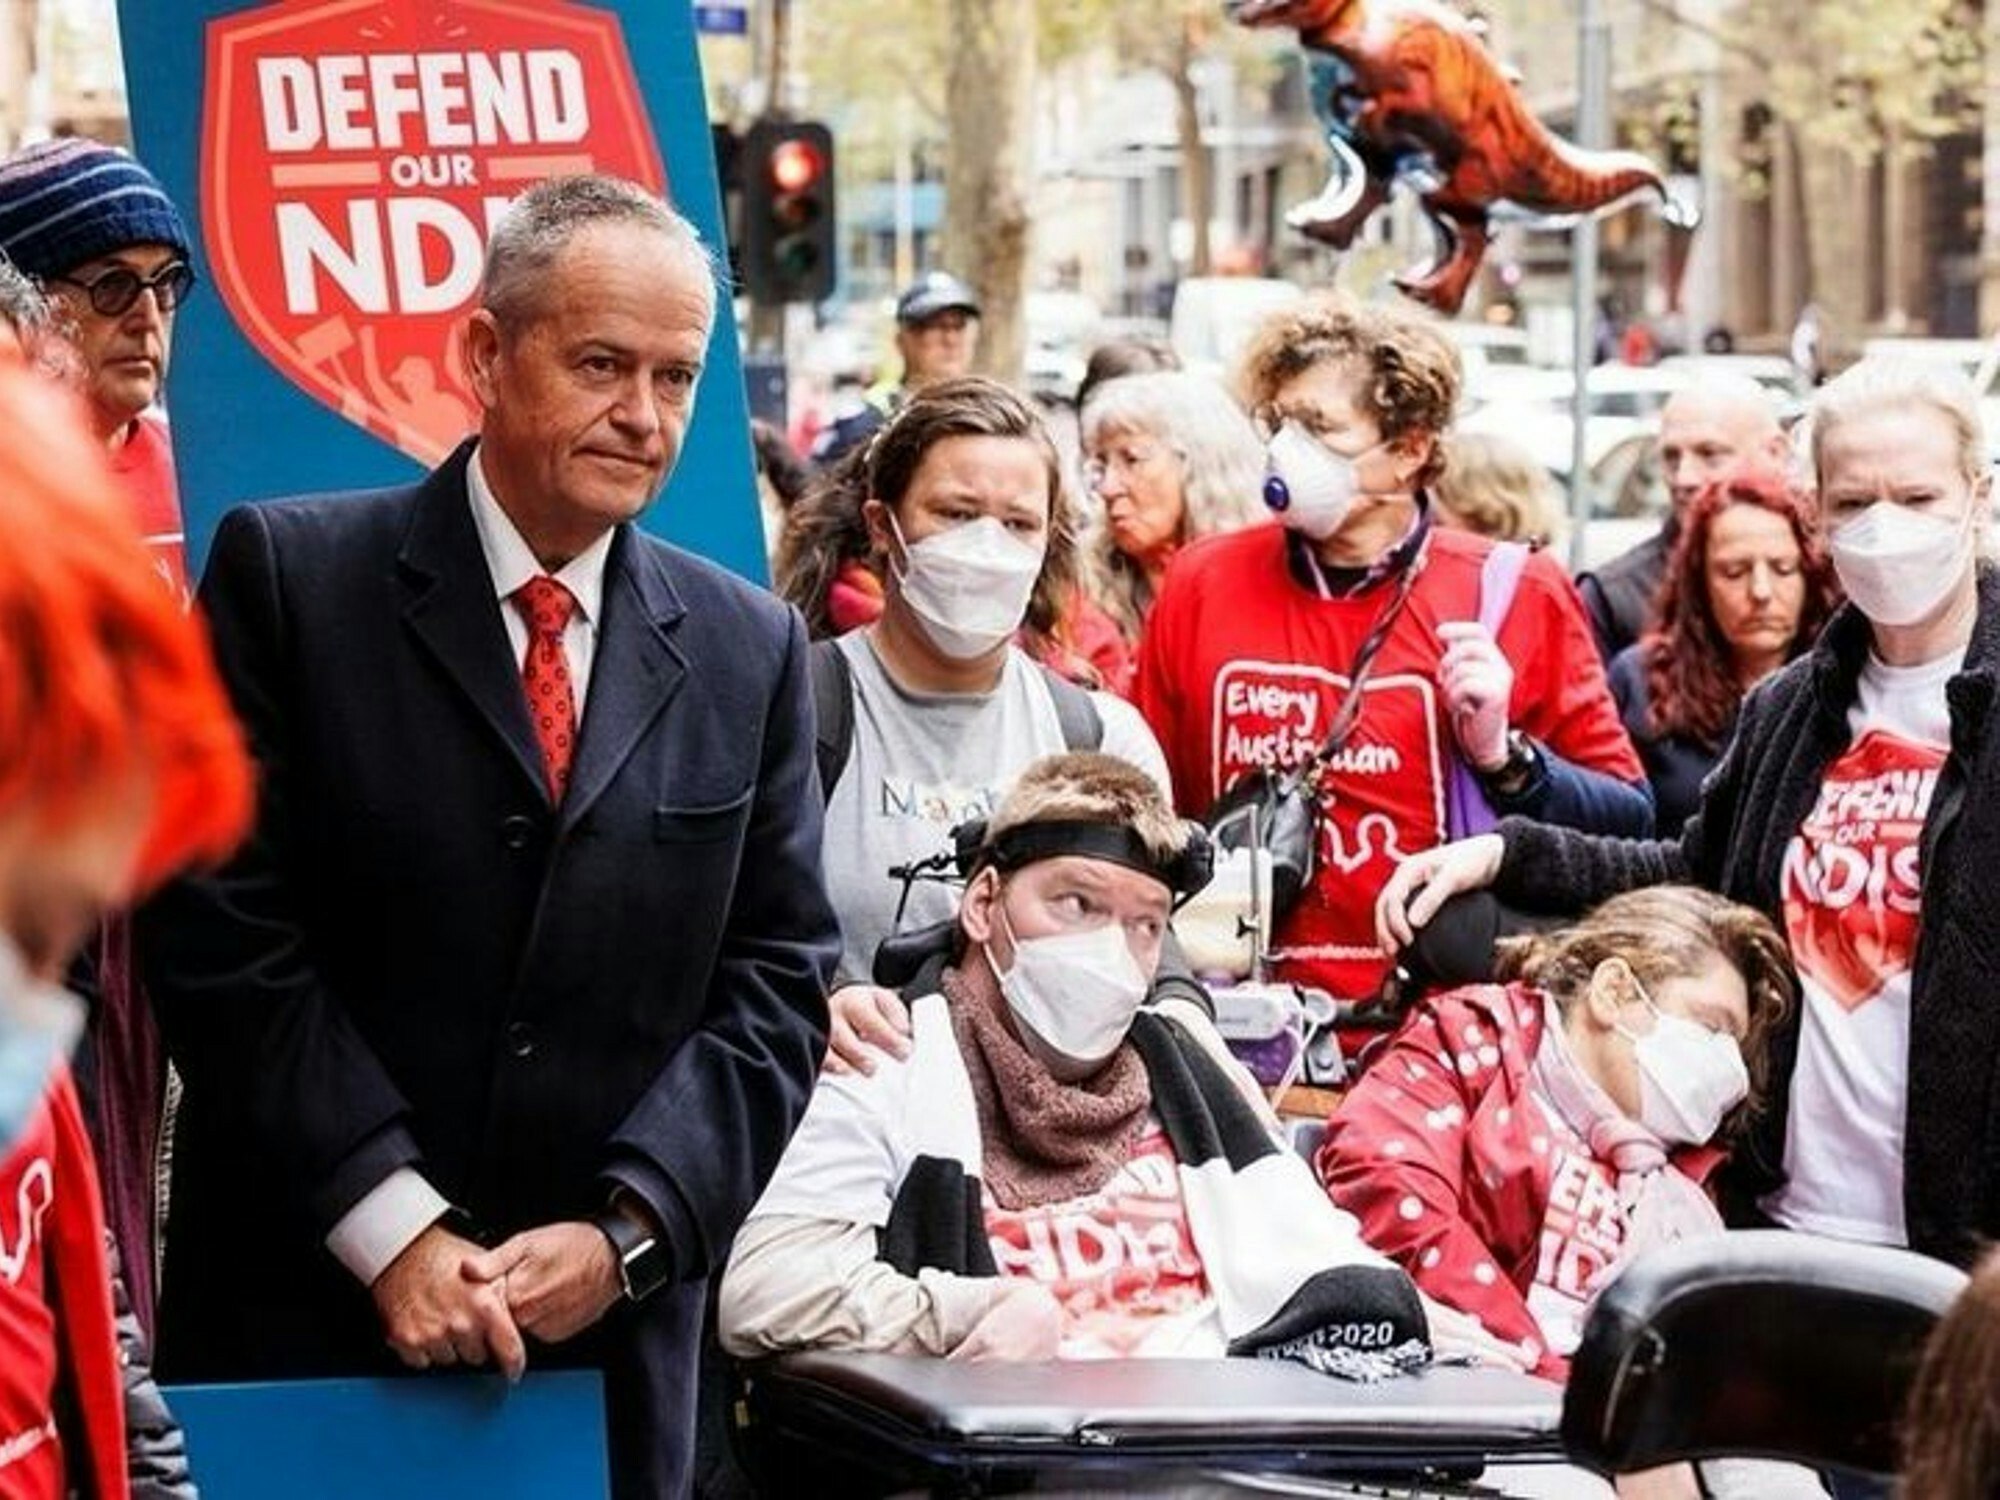 <p>Bill Shorten, NDIS Minister, announced a new independent committee to review appeals. [Source: Twitter]</p>
